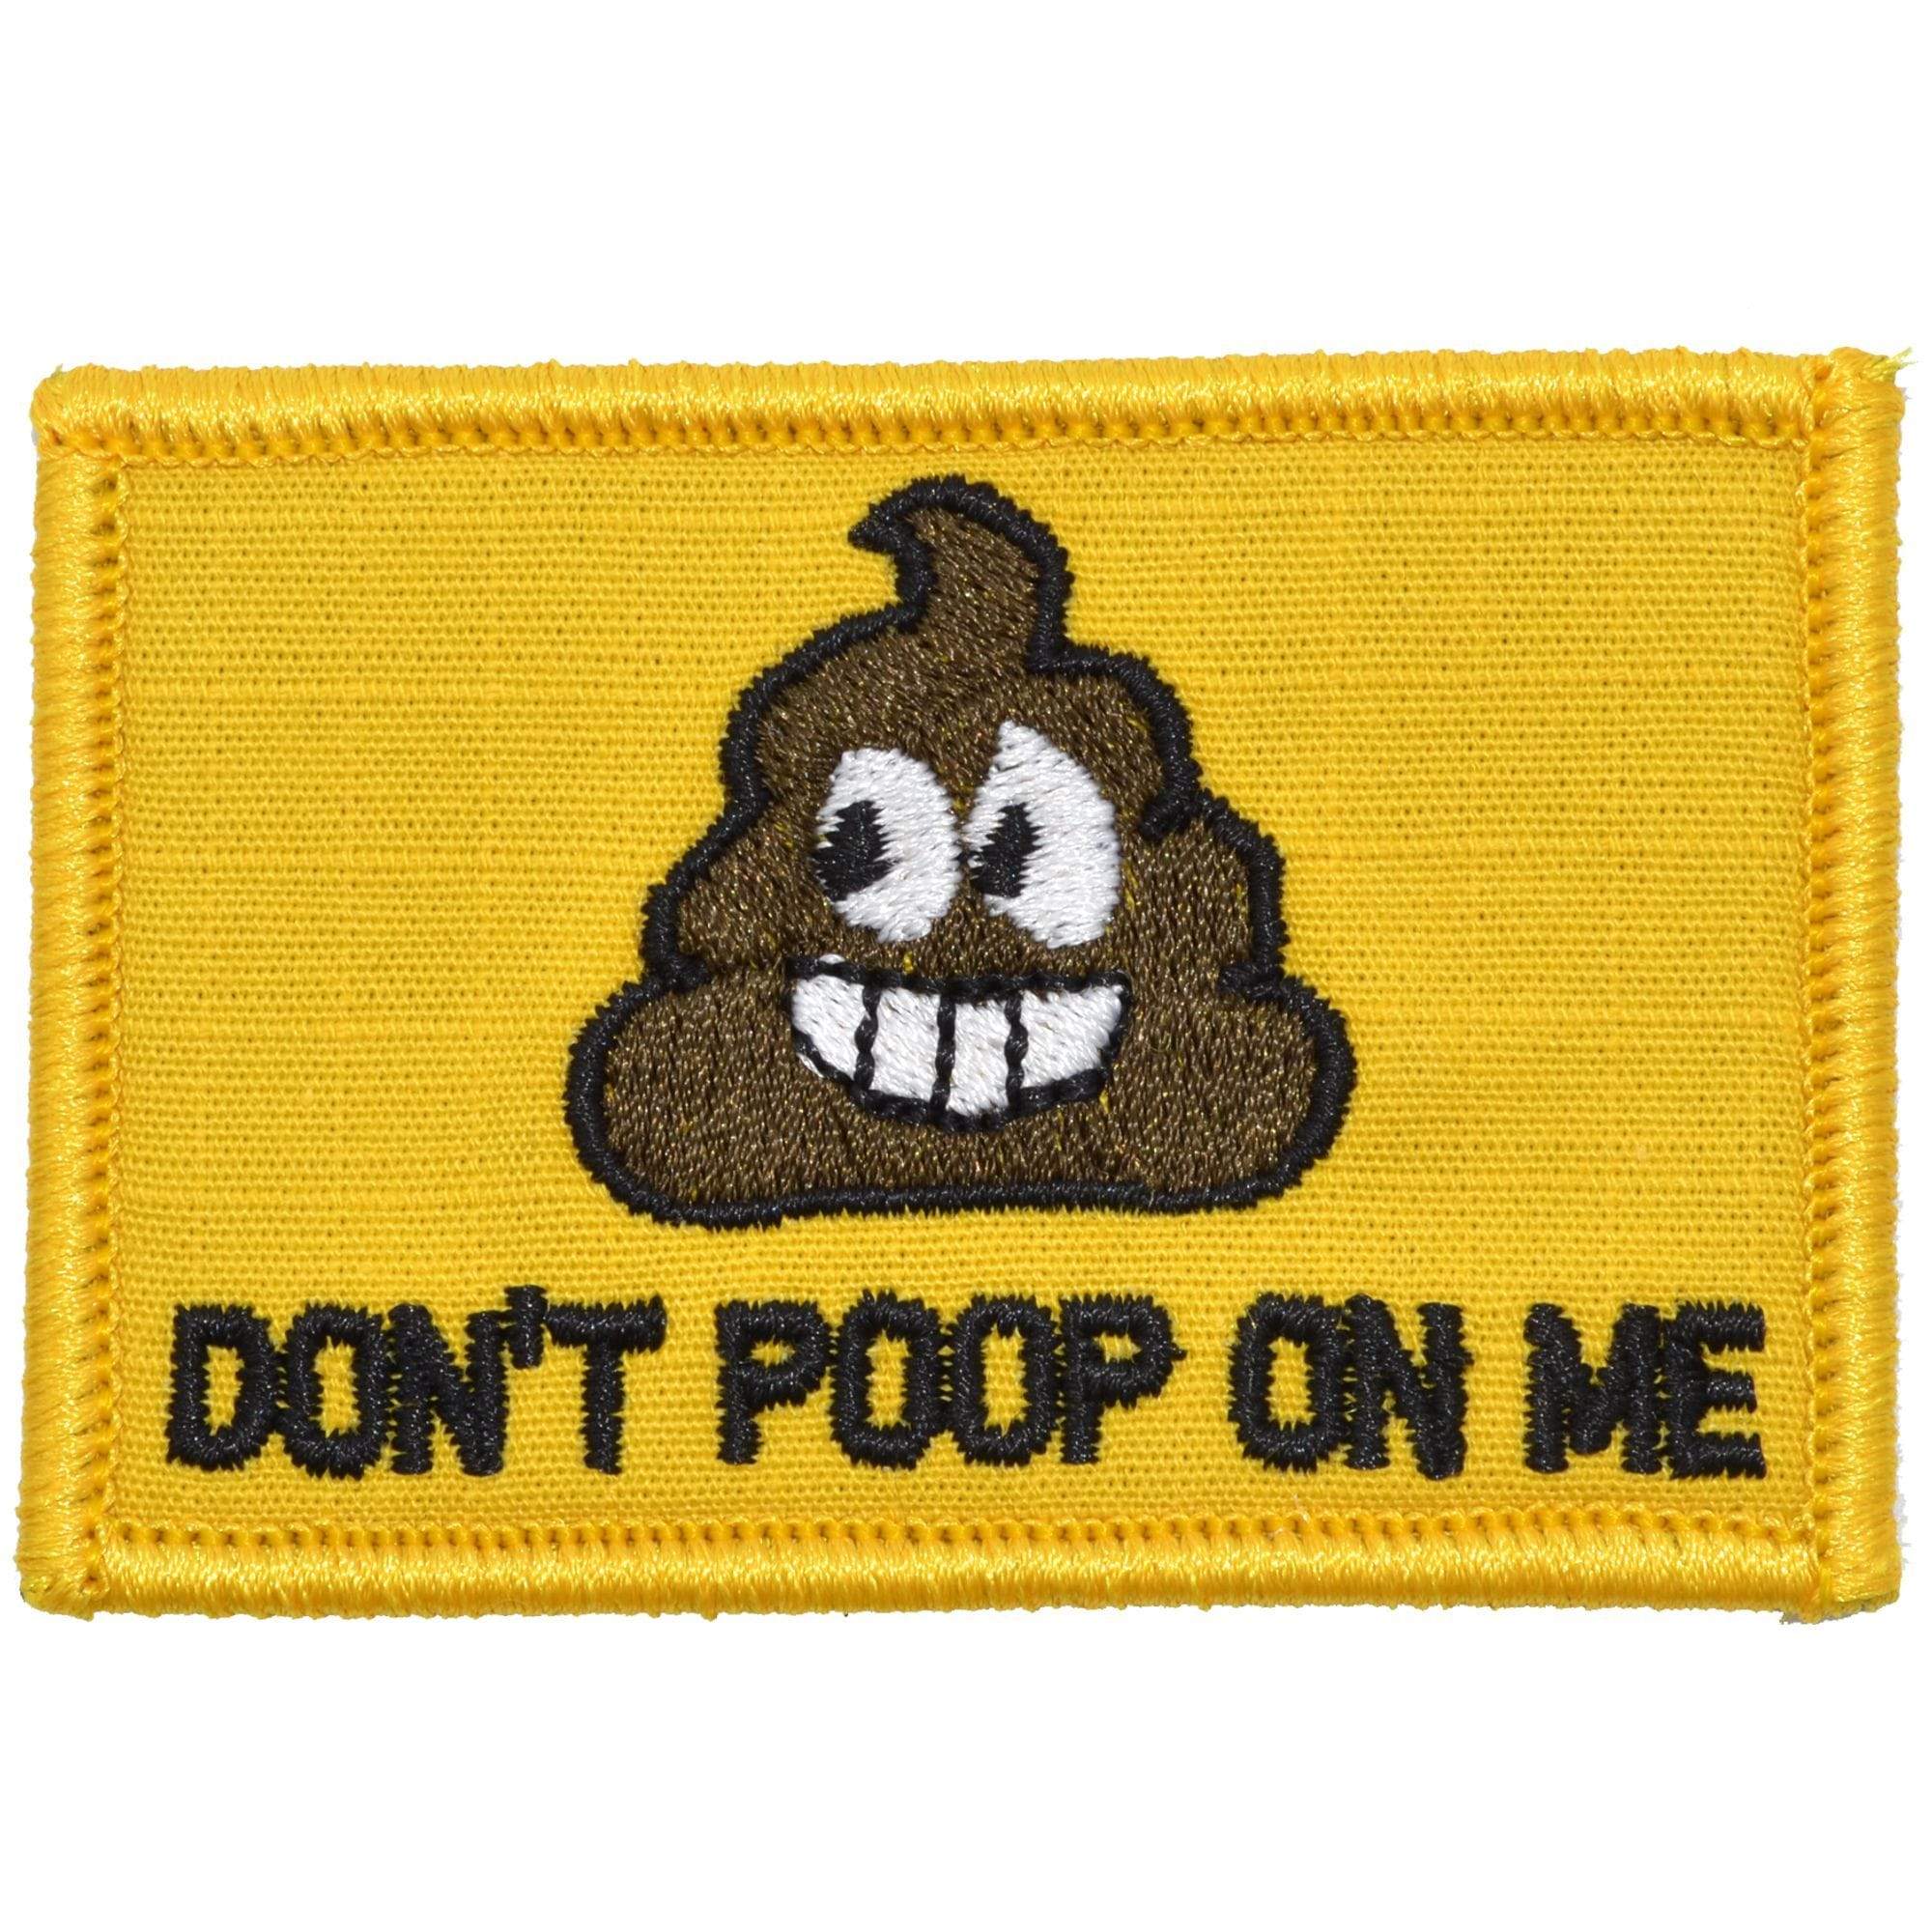 Tactical Gear Junkie Patches Full Color Don't Poop On Me - 2x3 Patch